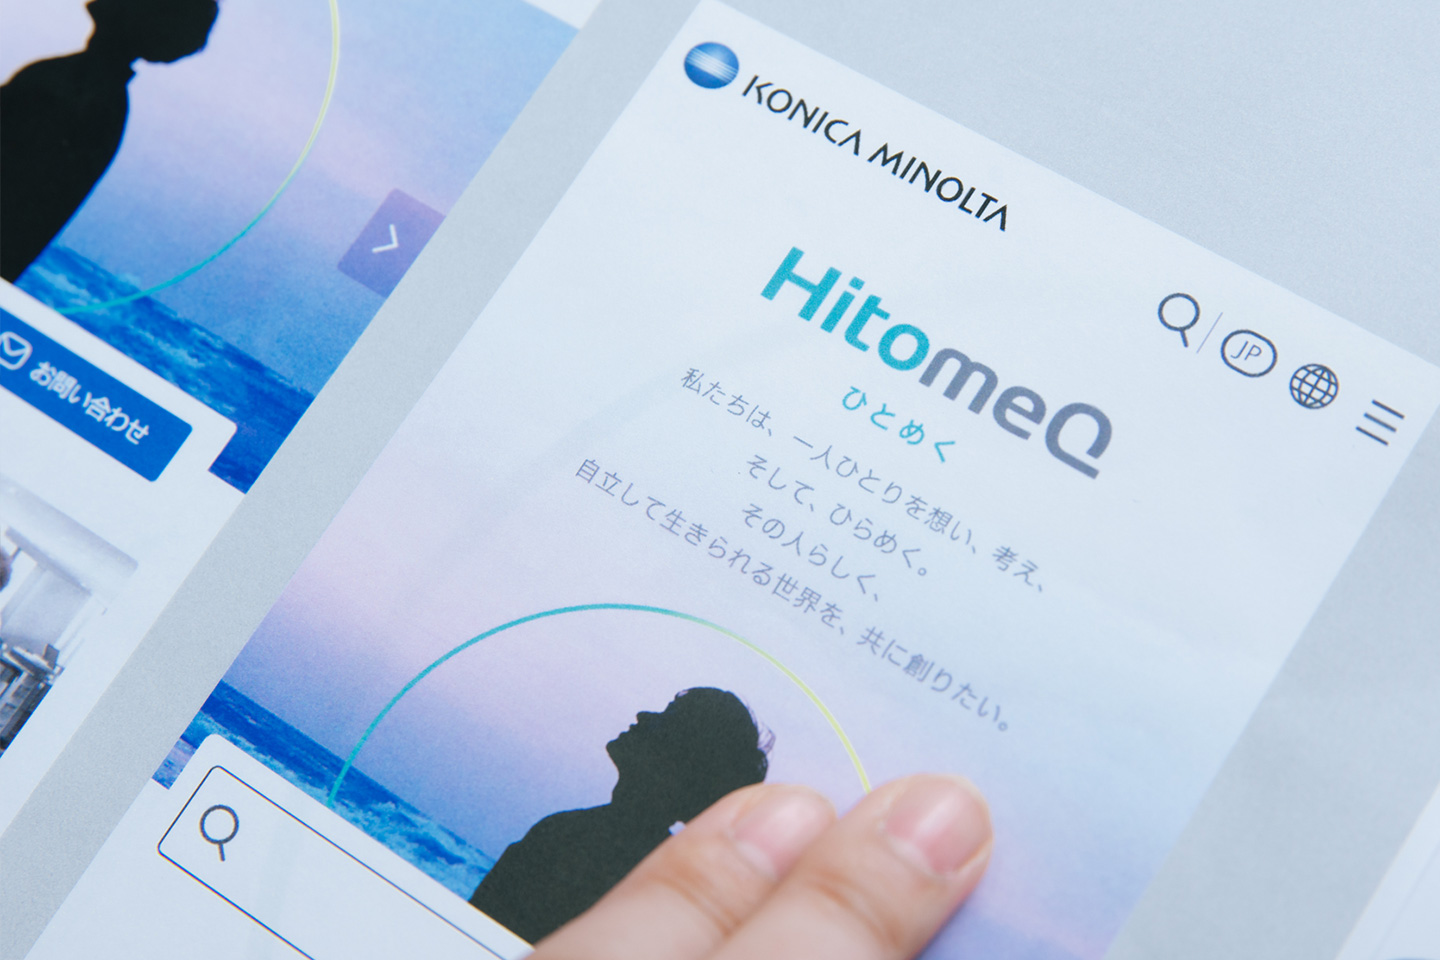 Photograph: A design proposal for an HitomeQ web page